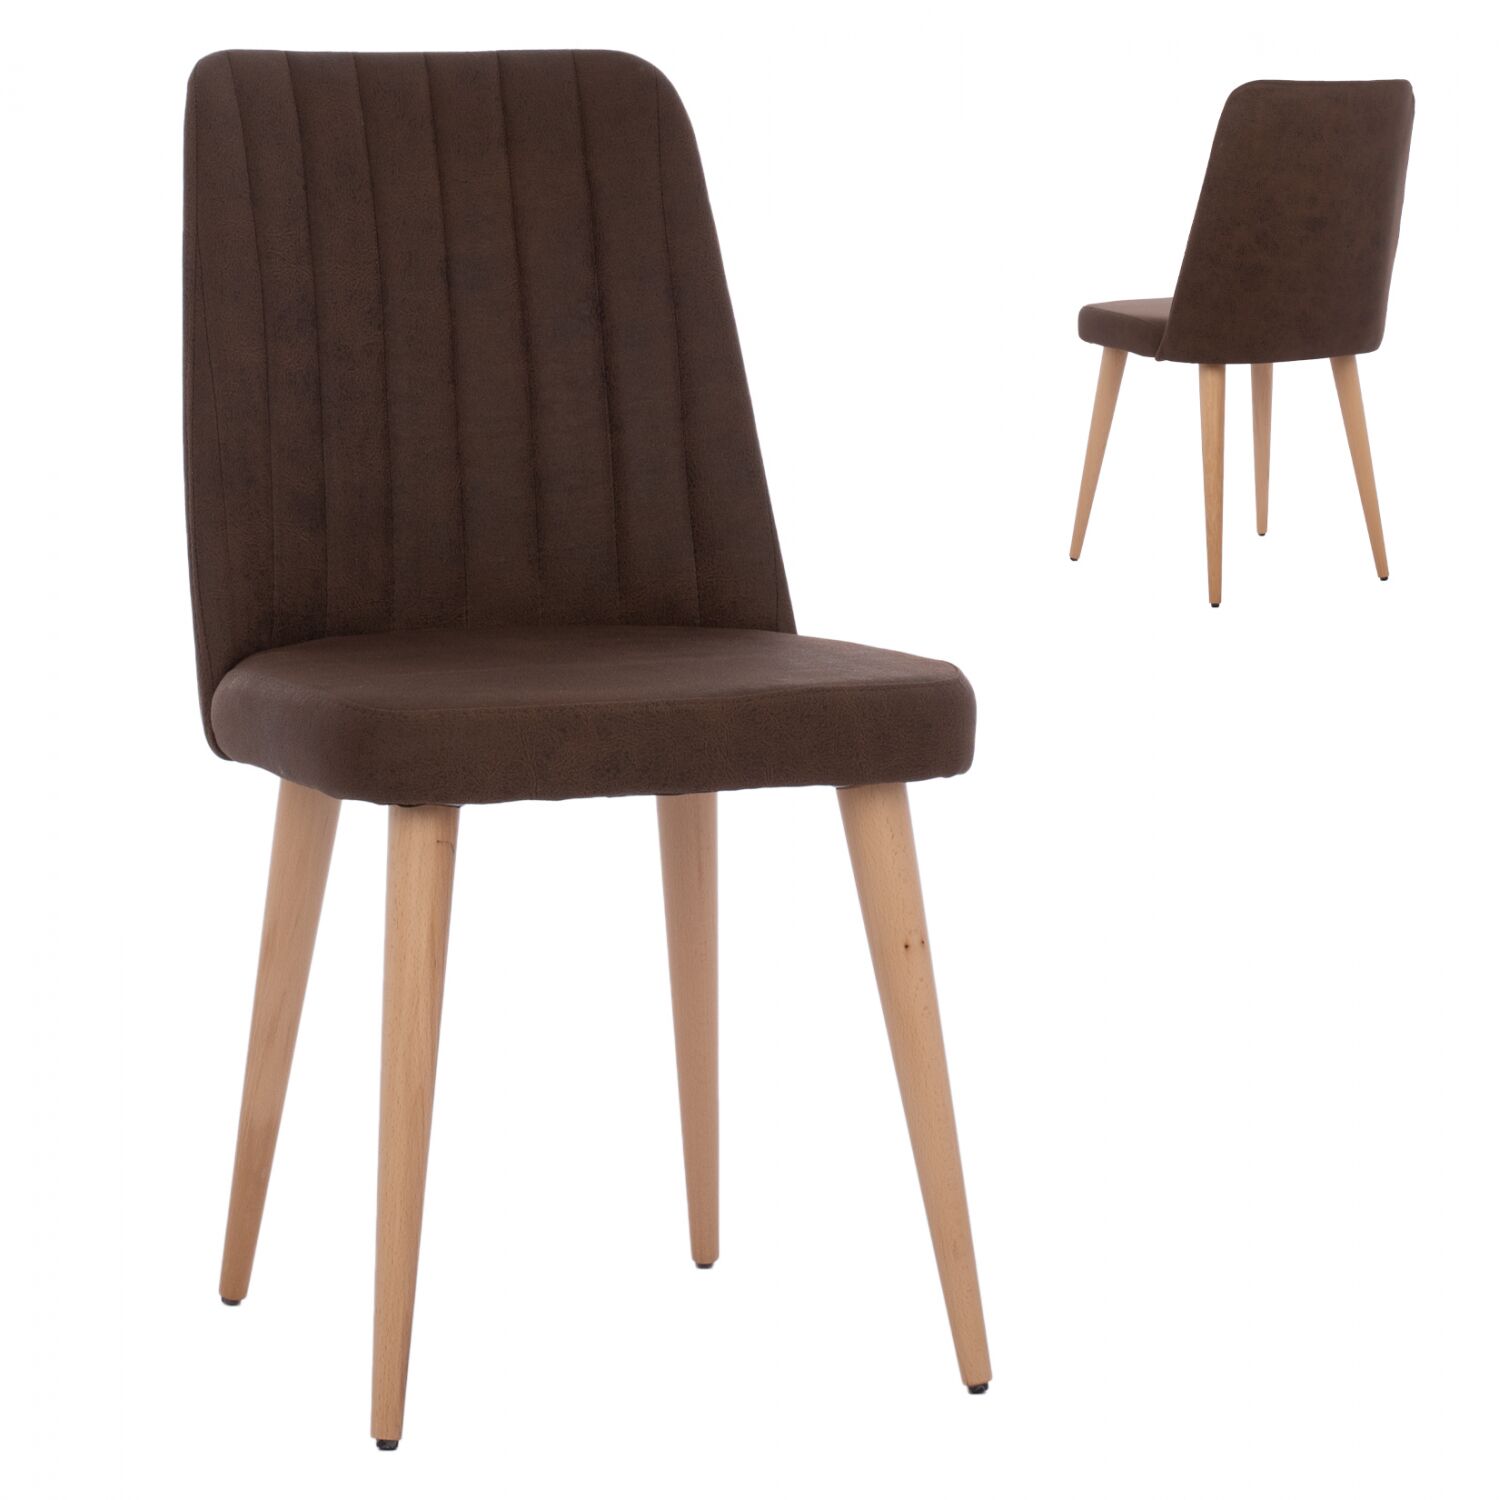 CHAIR “MARISOL” HM9266.23 BROWN NUBUCK-type FABRIC WITH WOODEN LEGS 47x57x91H CM.